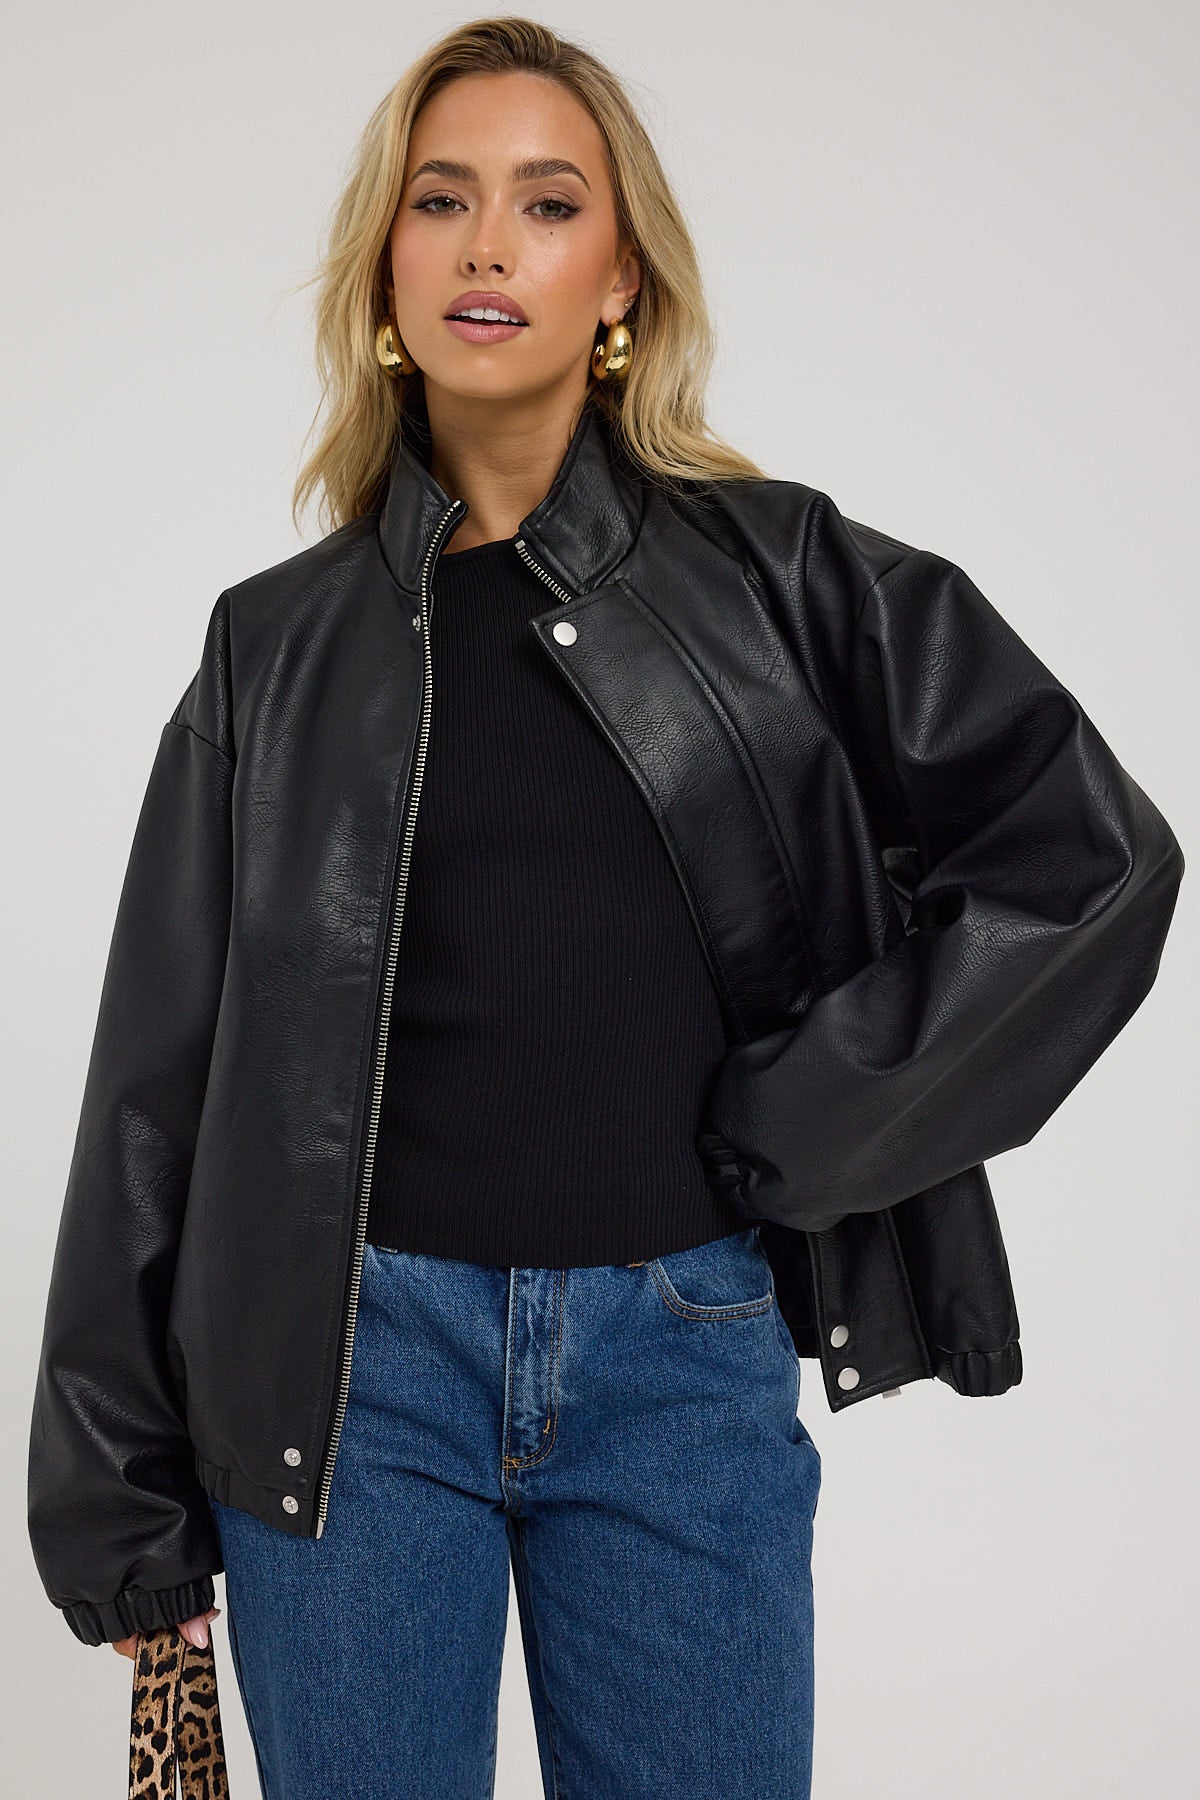 Neovision Berlin Faux Leather Track Jacket Black